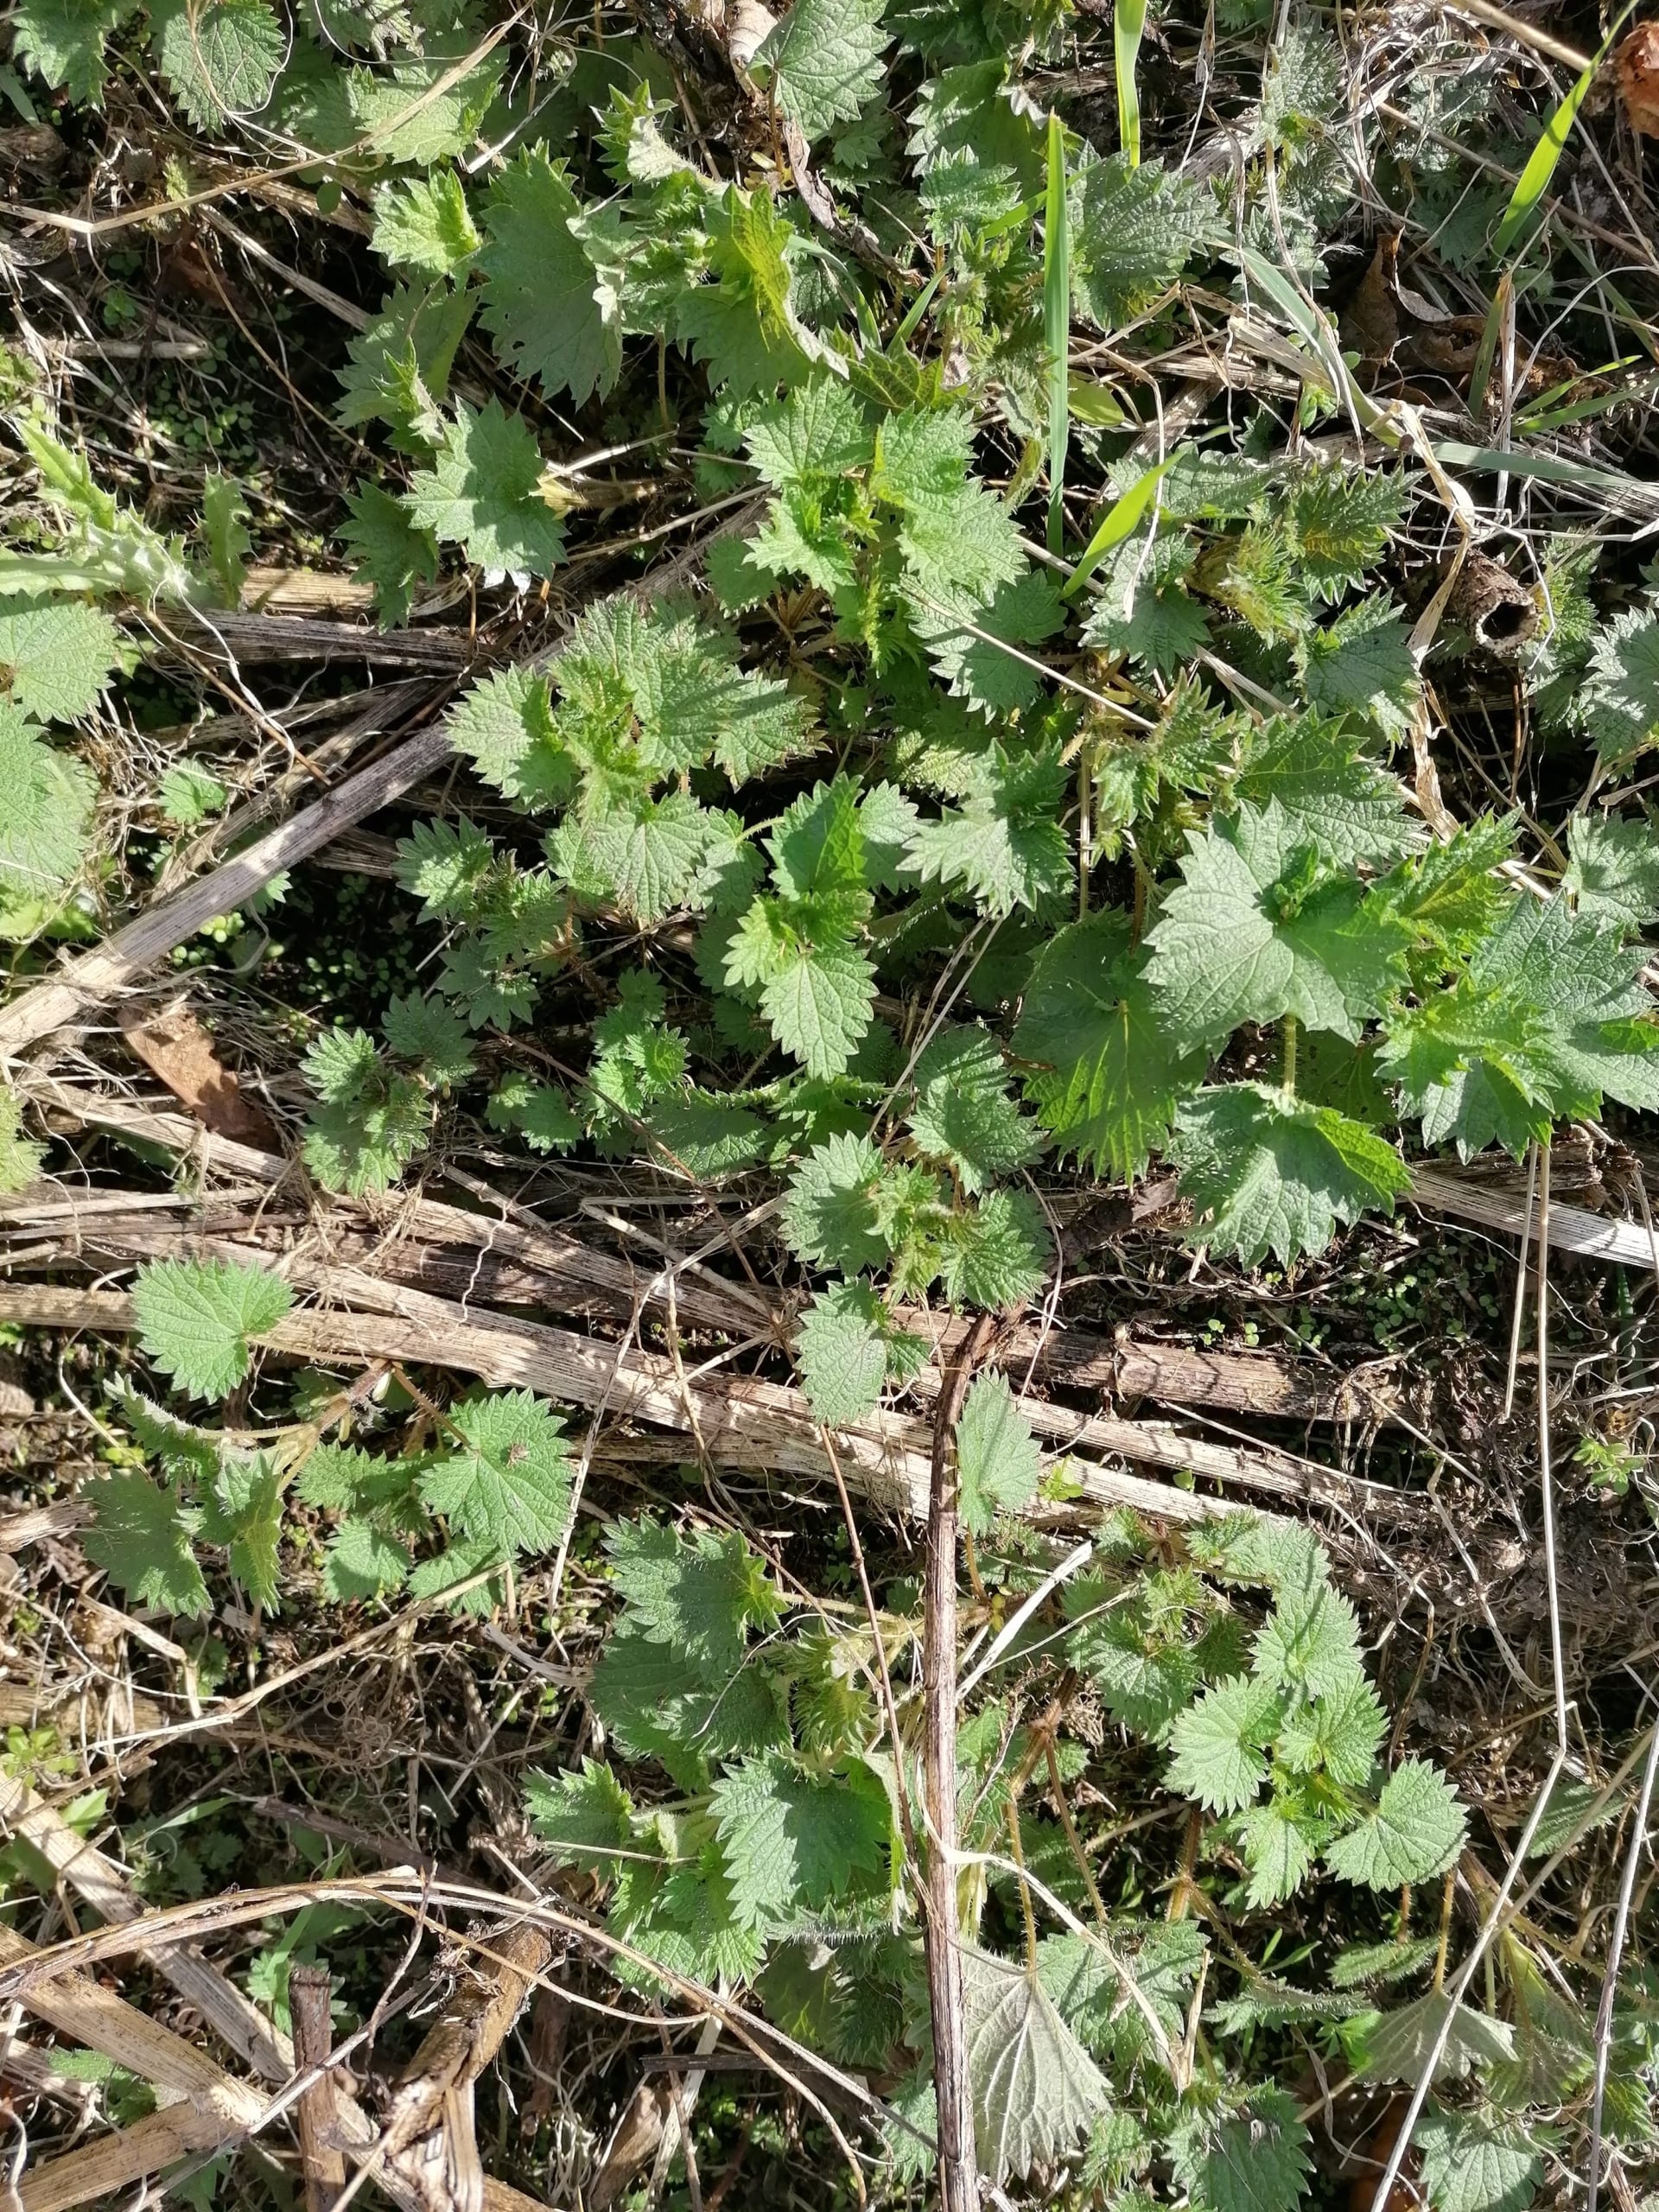 An image of a patch of nettles